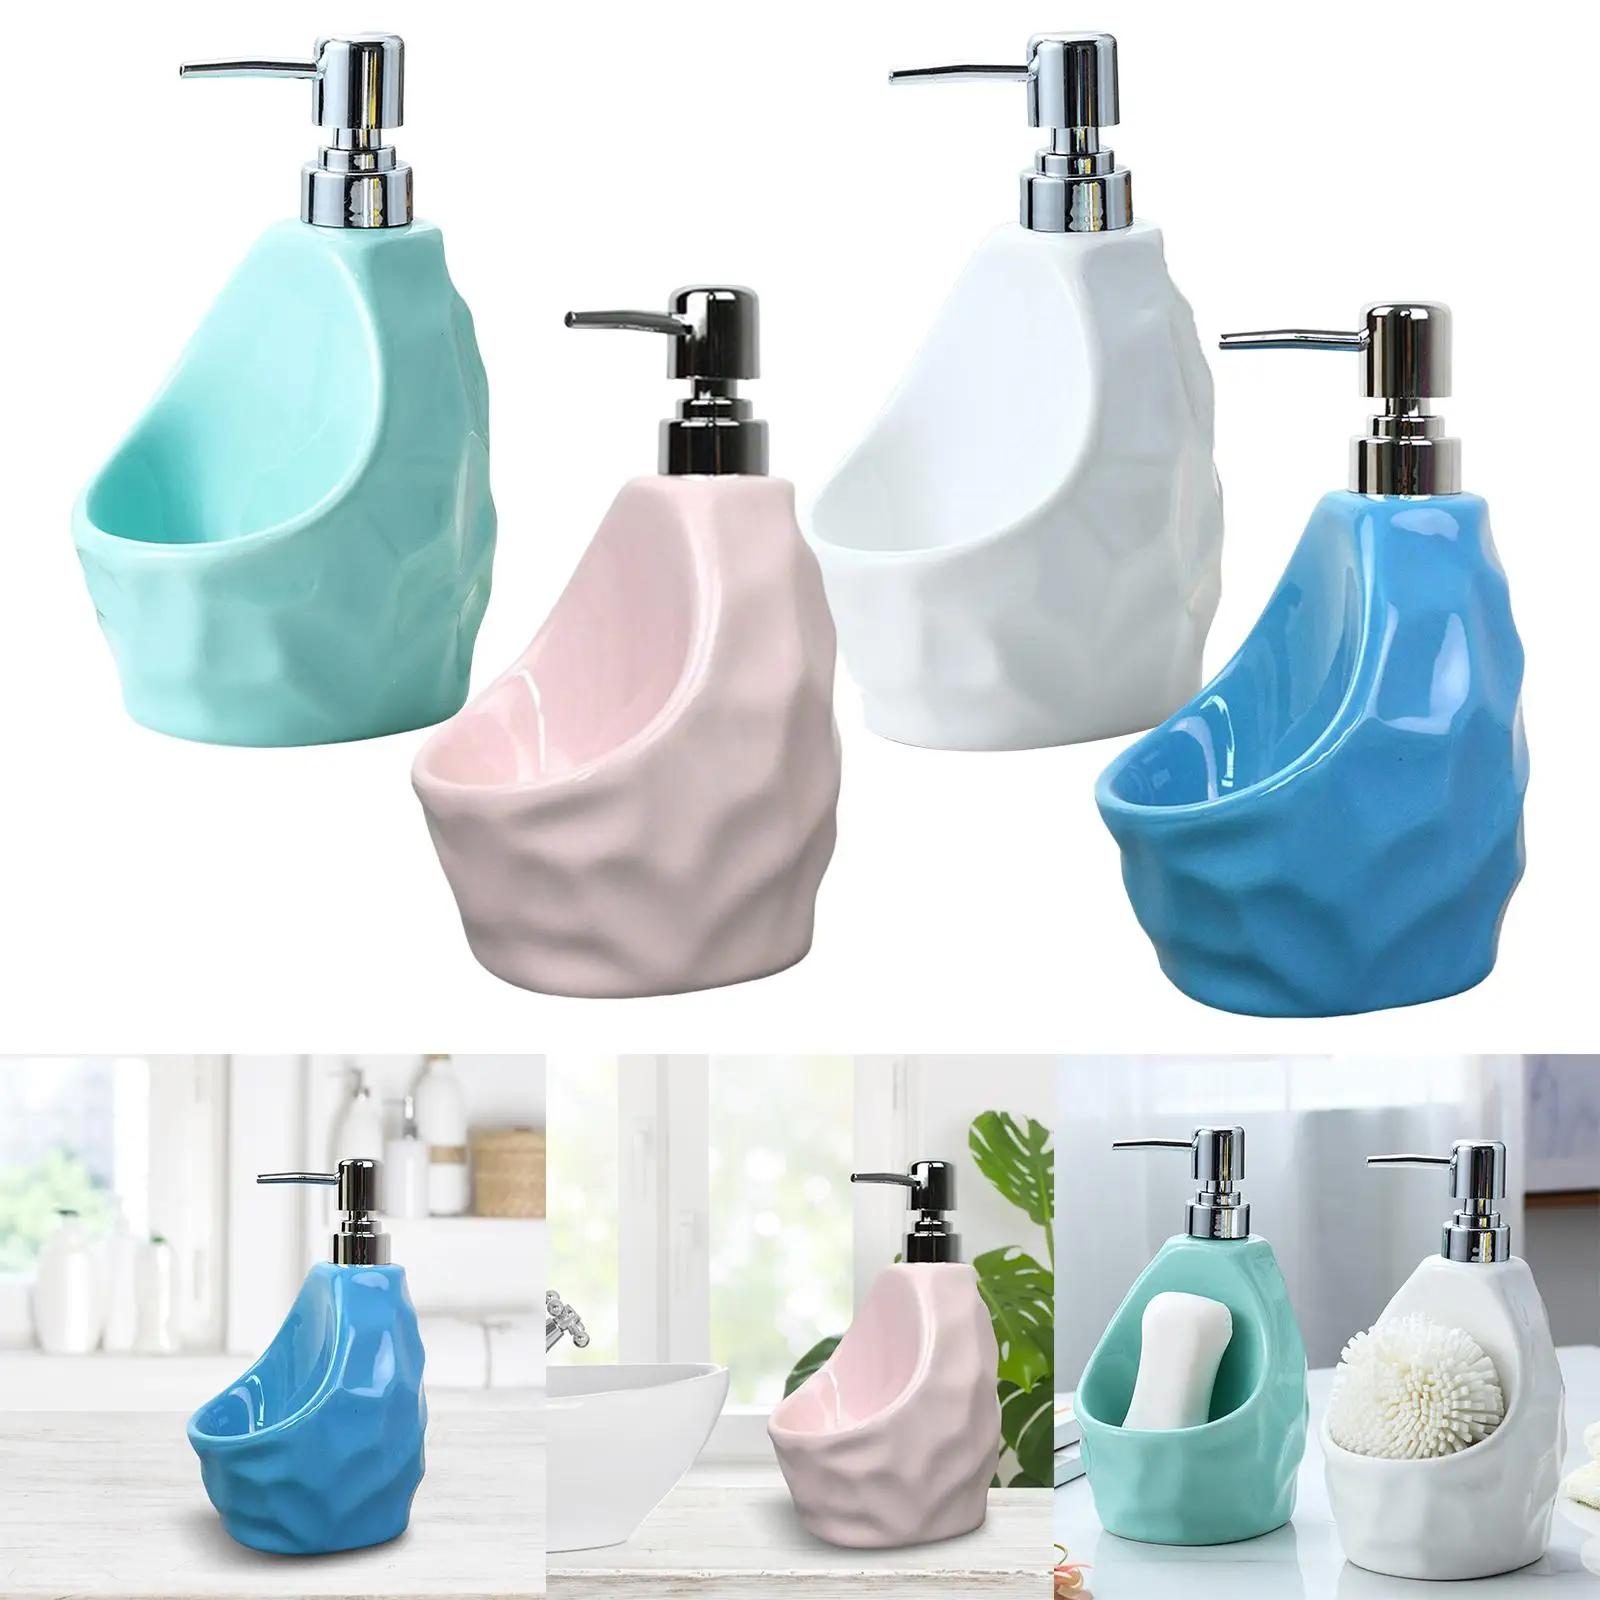 650ml Soap Dispenser Holds Stores Sponges Scrubbers Brushes Refillable Container